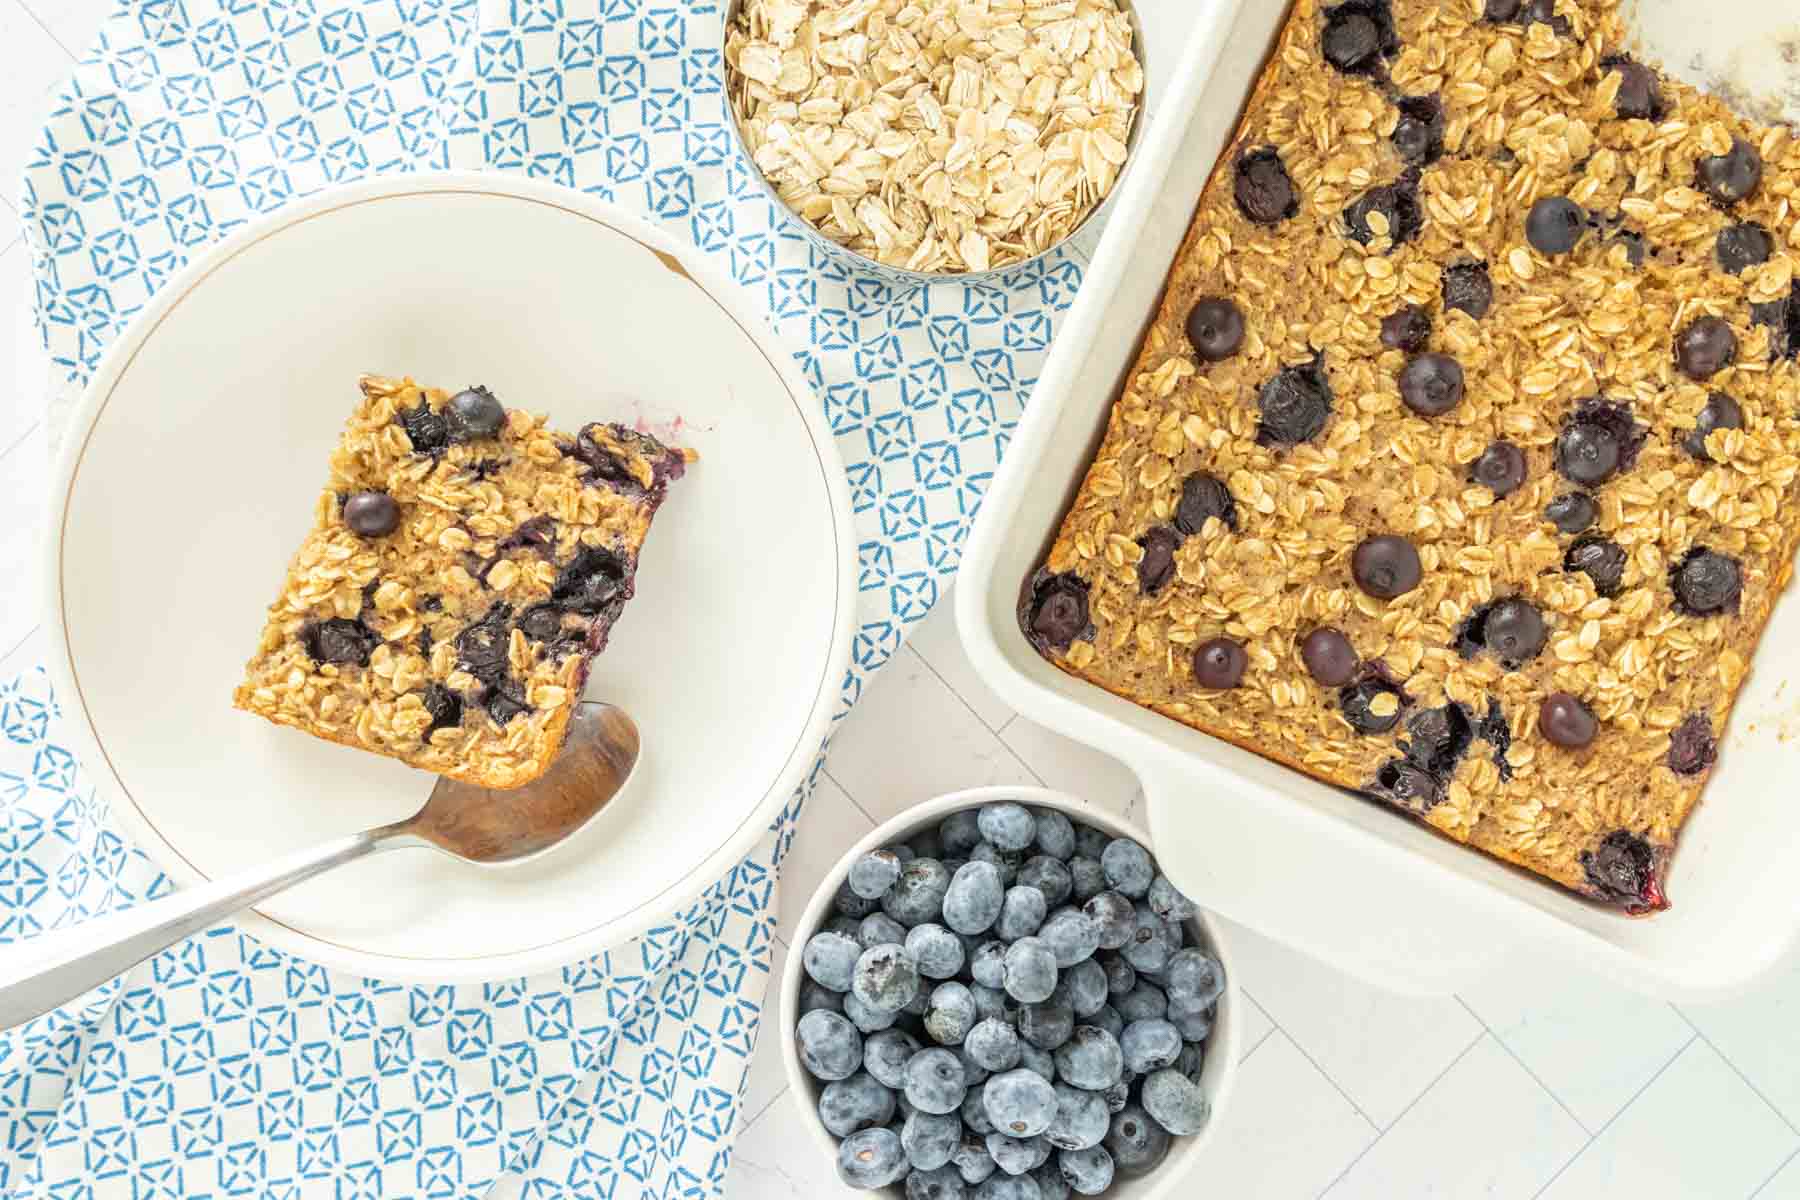 Blueberry baked oatmeal in a white dish with blueberries.